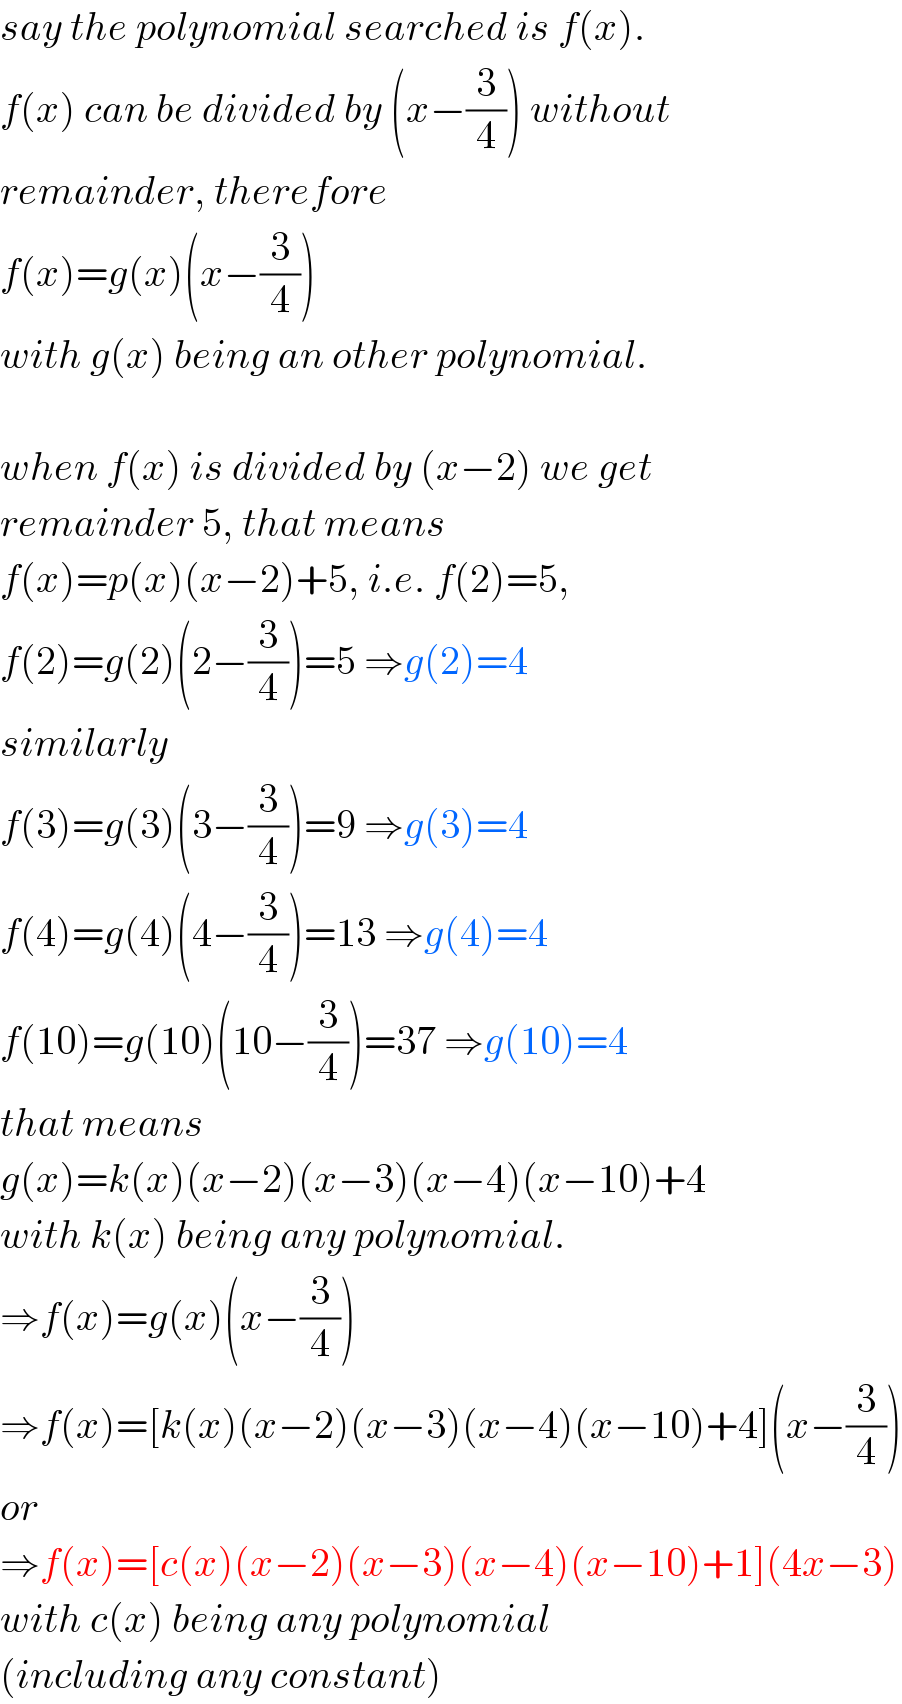 say the polynomial searched is f(x).  f(x) can be divided by (x−(3/4)) without  remainder, therefore  f(x)=g(x)(x−(3/4))  with g(x) being an other polynomial.    when f(x) is divided by (x−2) we get  remainder 5, that means  f(x)=p(x)(x−2)+5, i.e. f(2)=5,  f(2)=g(2)(2−(3/4))=5 ⇒g(2)=4  similarly  f(3)=g(3)(3−(3/4))=9 ⇒g(3)=4  f(4)=g(4)(4−(3/4))=13 ⇒g(4)=4  f(10)=g(10)(10−(3/4))=37 ⇒g(10)=4  that means  g(x)=k(x)(x−2)(x−3)(x−4)(x−10)+4  with k(x) being any polynomial.  ⇒f(x)=g(x)(x−(3/4))  ⇒f(x)=[k(x)(x−2)(x−3)(x−4)(x−10)+4](x−(3/4))  or  ⇒f(x)=[c(x)(x−2)(x−3)(x−4)(x−10)+1](4x−3)  with c(x) being any polynomial  (including any constant)  